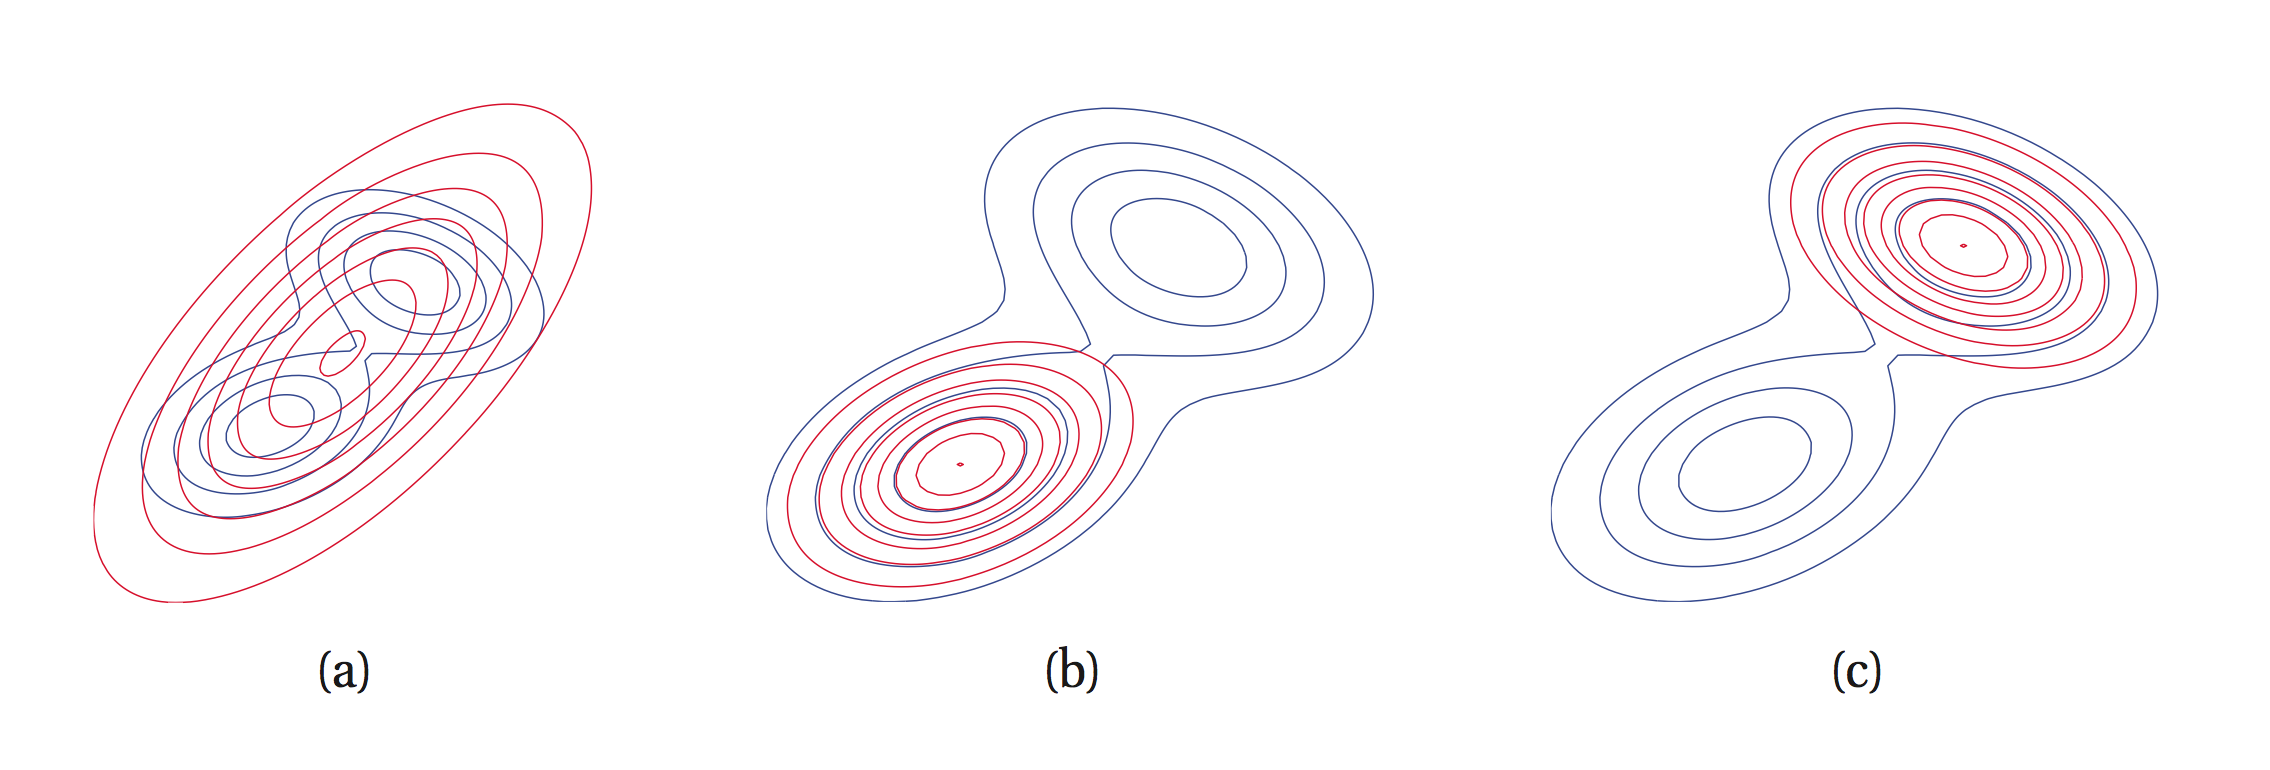 Fitting a unimodal approximating distribution q (red) to a multimodal p (blue). Using KL(p||q) leads to a q that tries to cover both modes (a). However, using KL(q||p) forces q to choose one of the two modes of p (b, c).